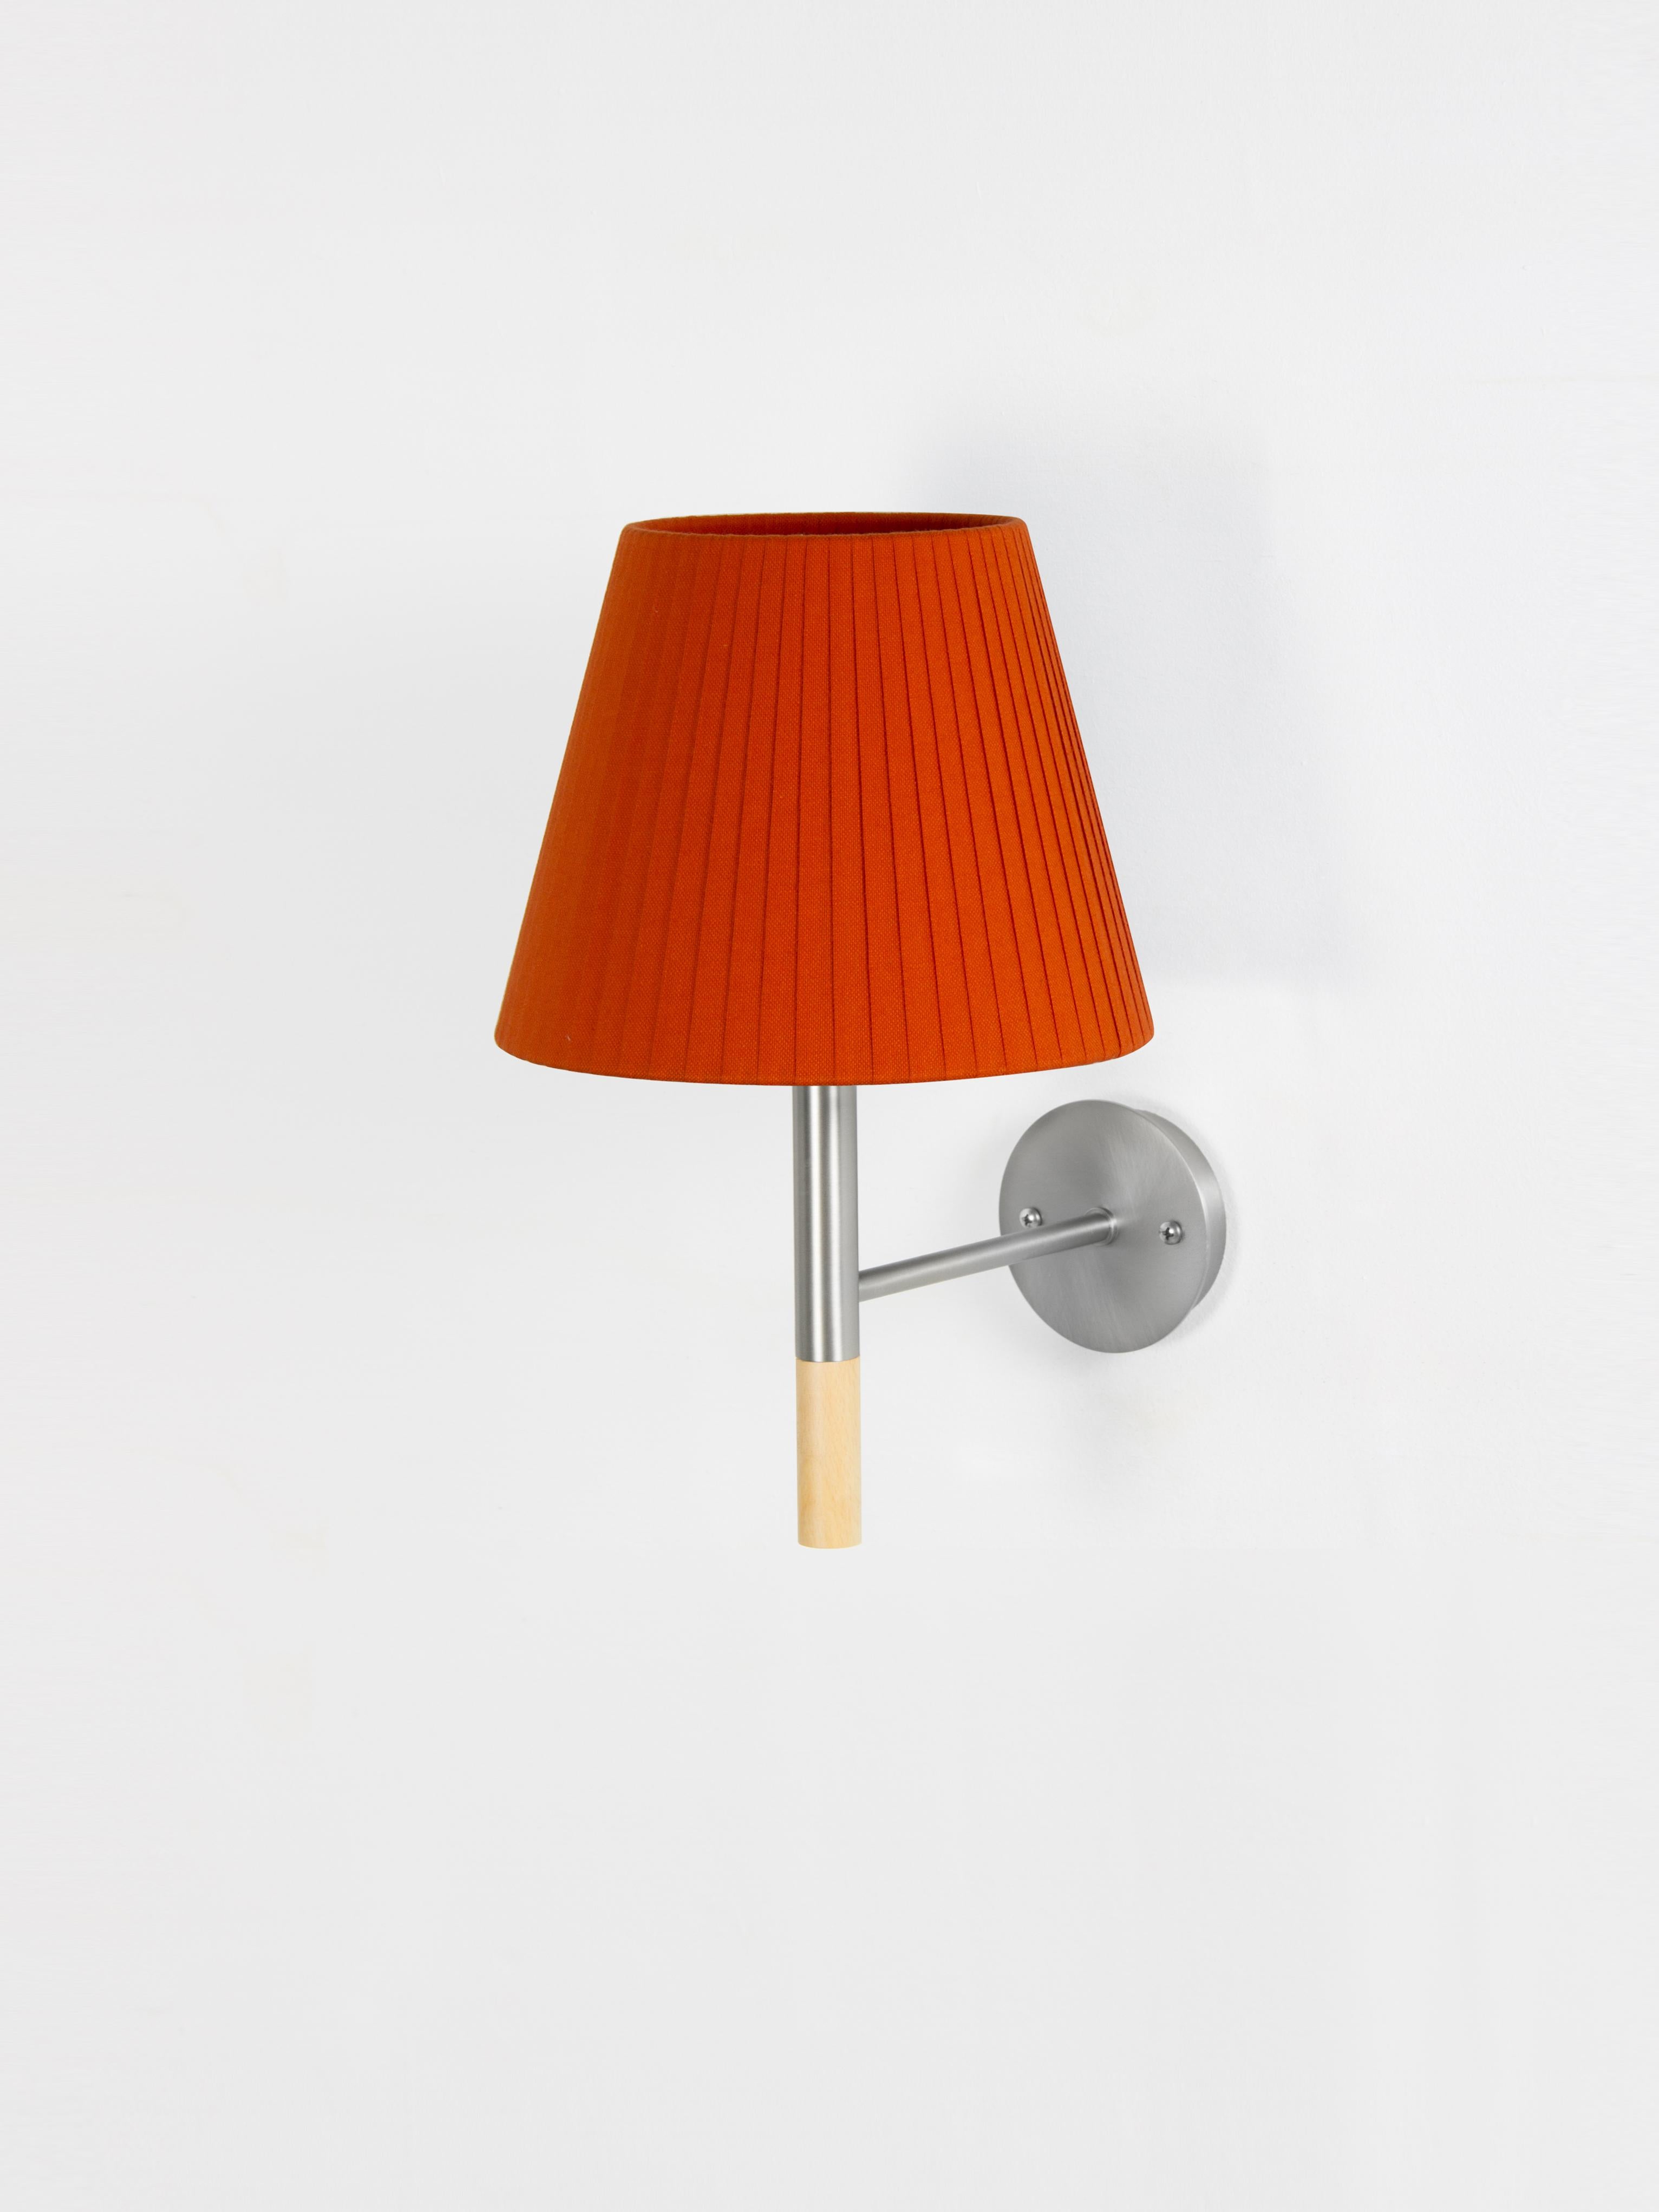 Red BC2 wall lamp by Santa & Cole
Dimensions: D 20 x W 26 x H 33 cm
Materials: Metal, beech wood, ribbon.

The BC1, BC2 and BC3 wall lamps are the epitome of sturdy construction, aesthetic sobriety and functional quality. Their various shade